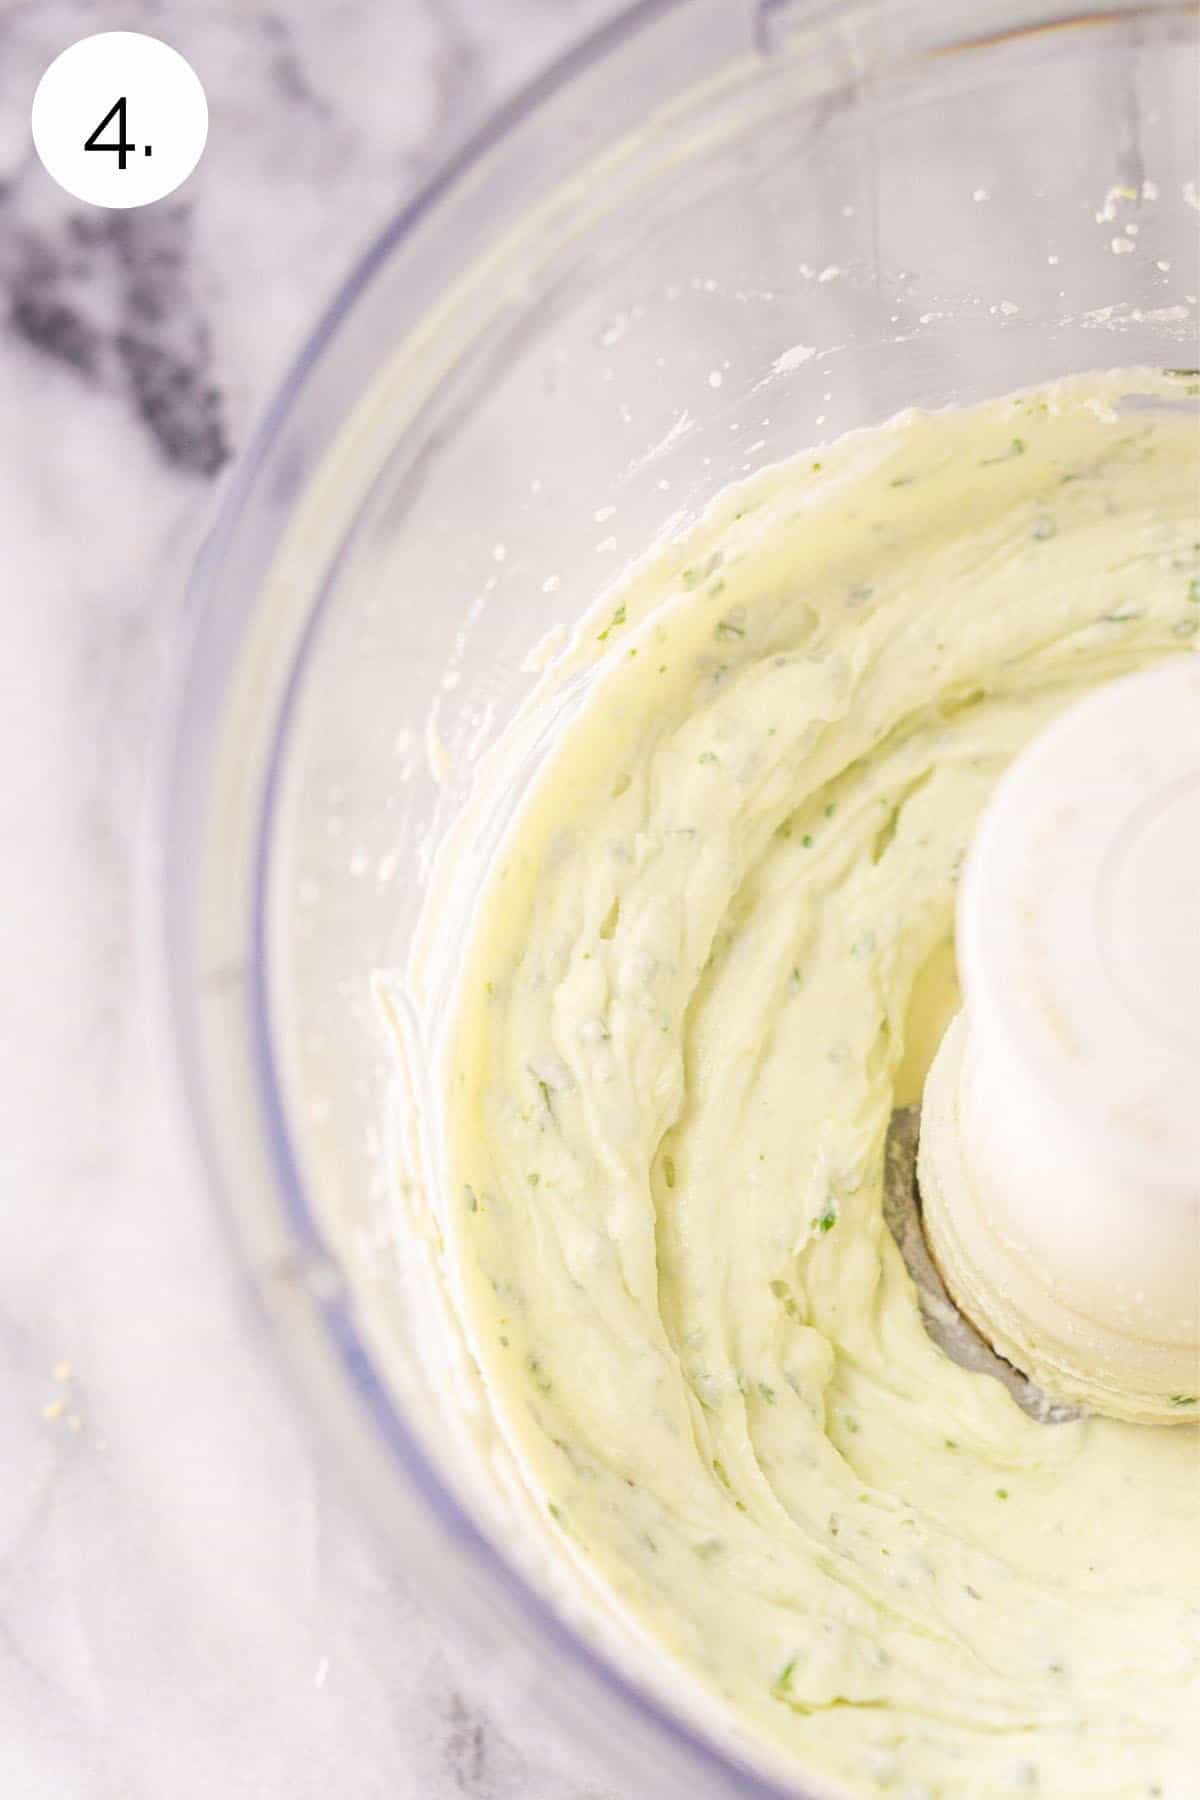 The dip in the food processor after blending until it's smooth and creamy.